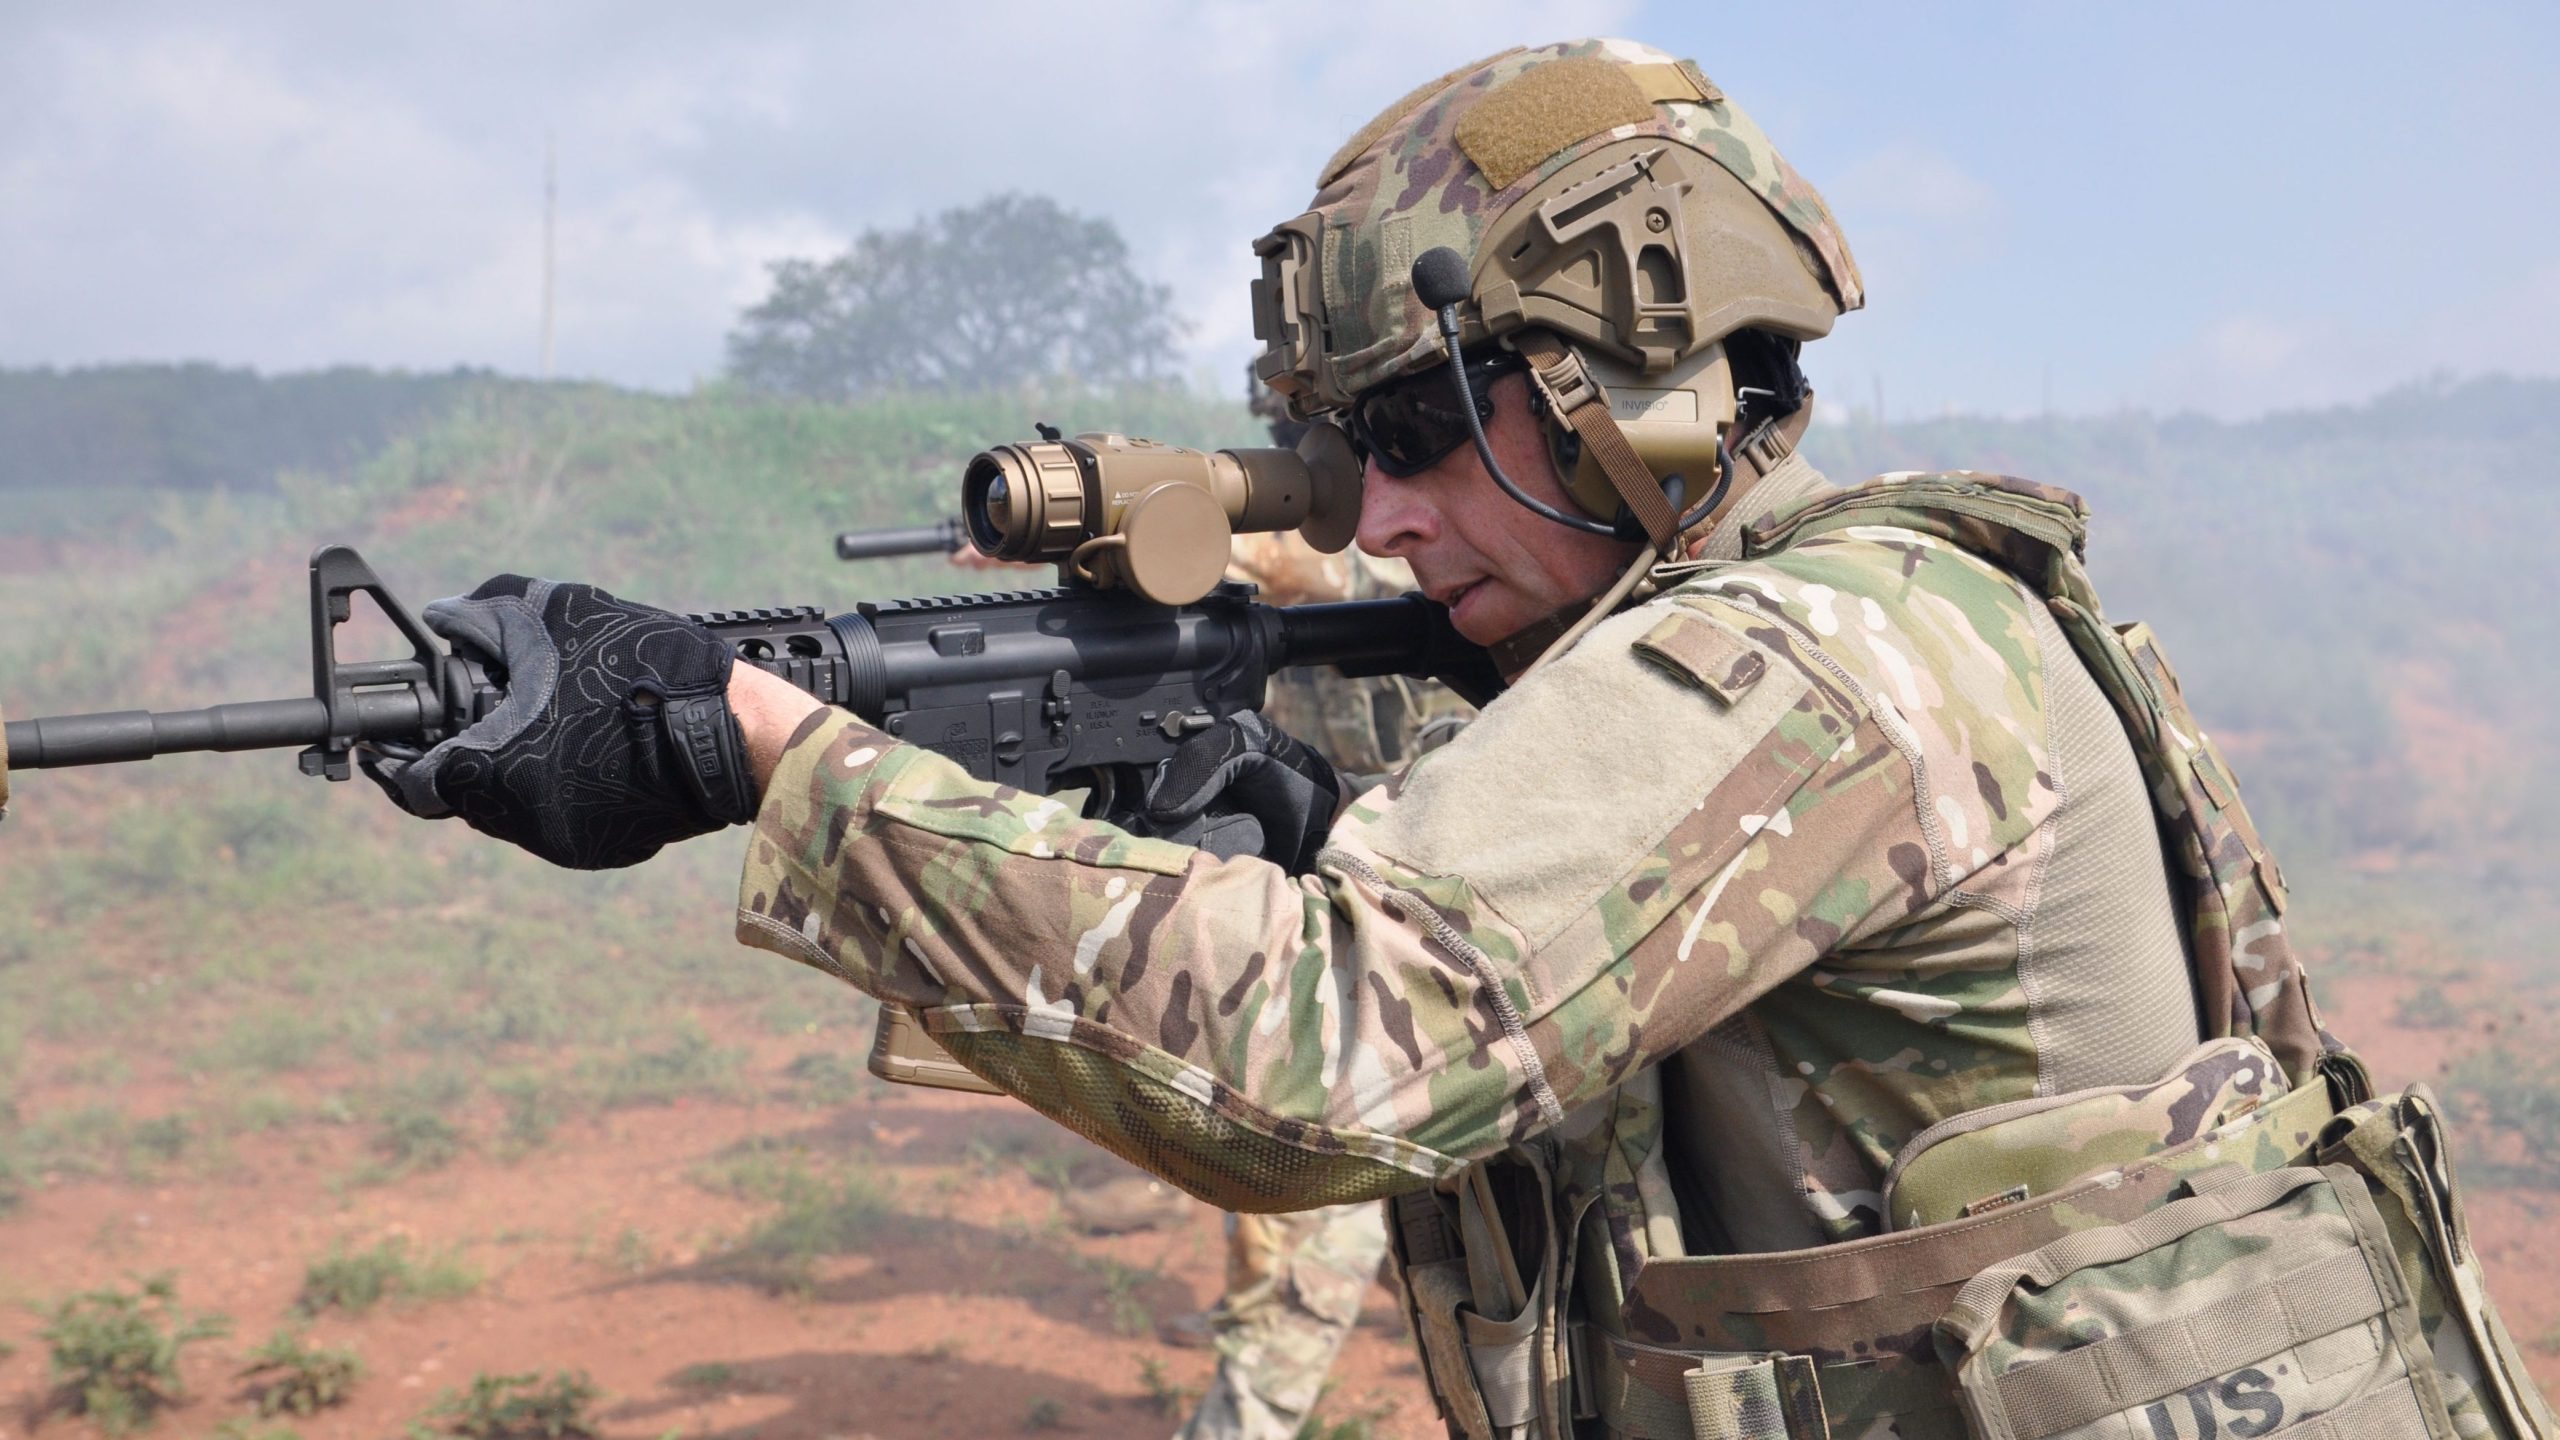 Leonardo DRS Awarded $134 Million Production Order for Family of Weapon Sights